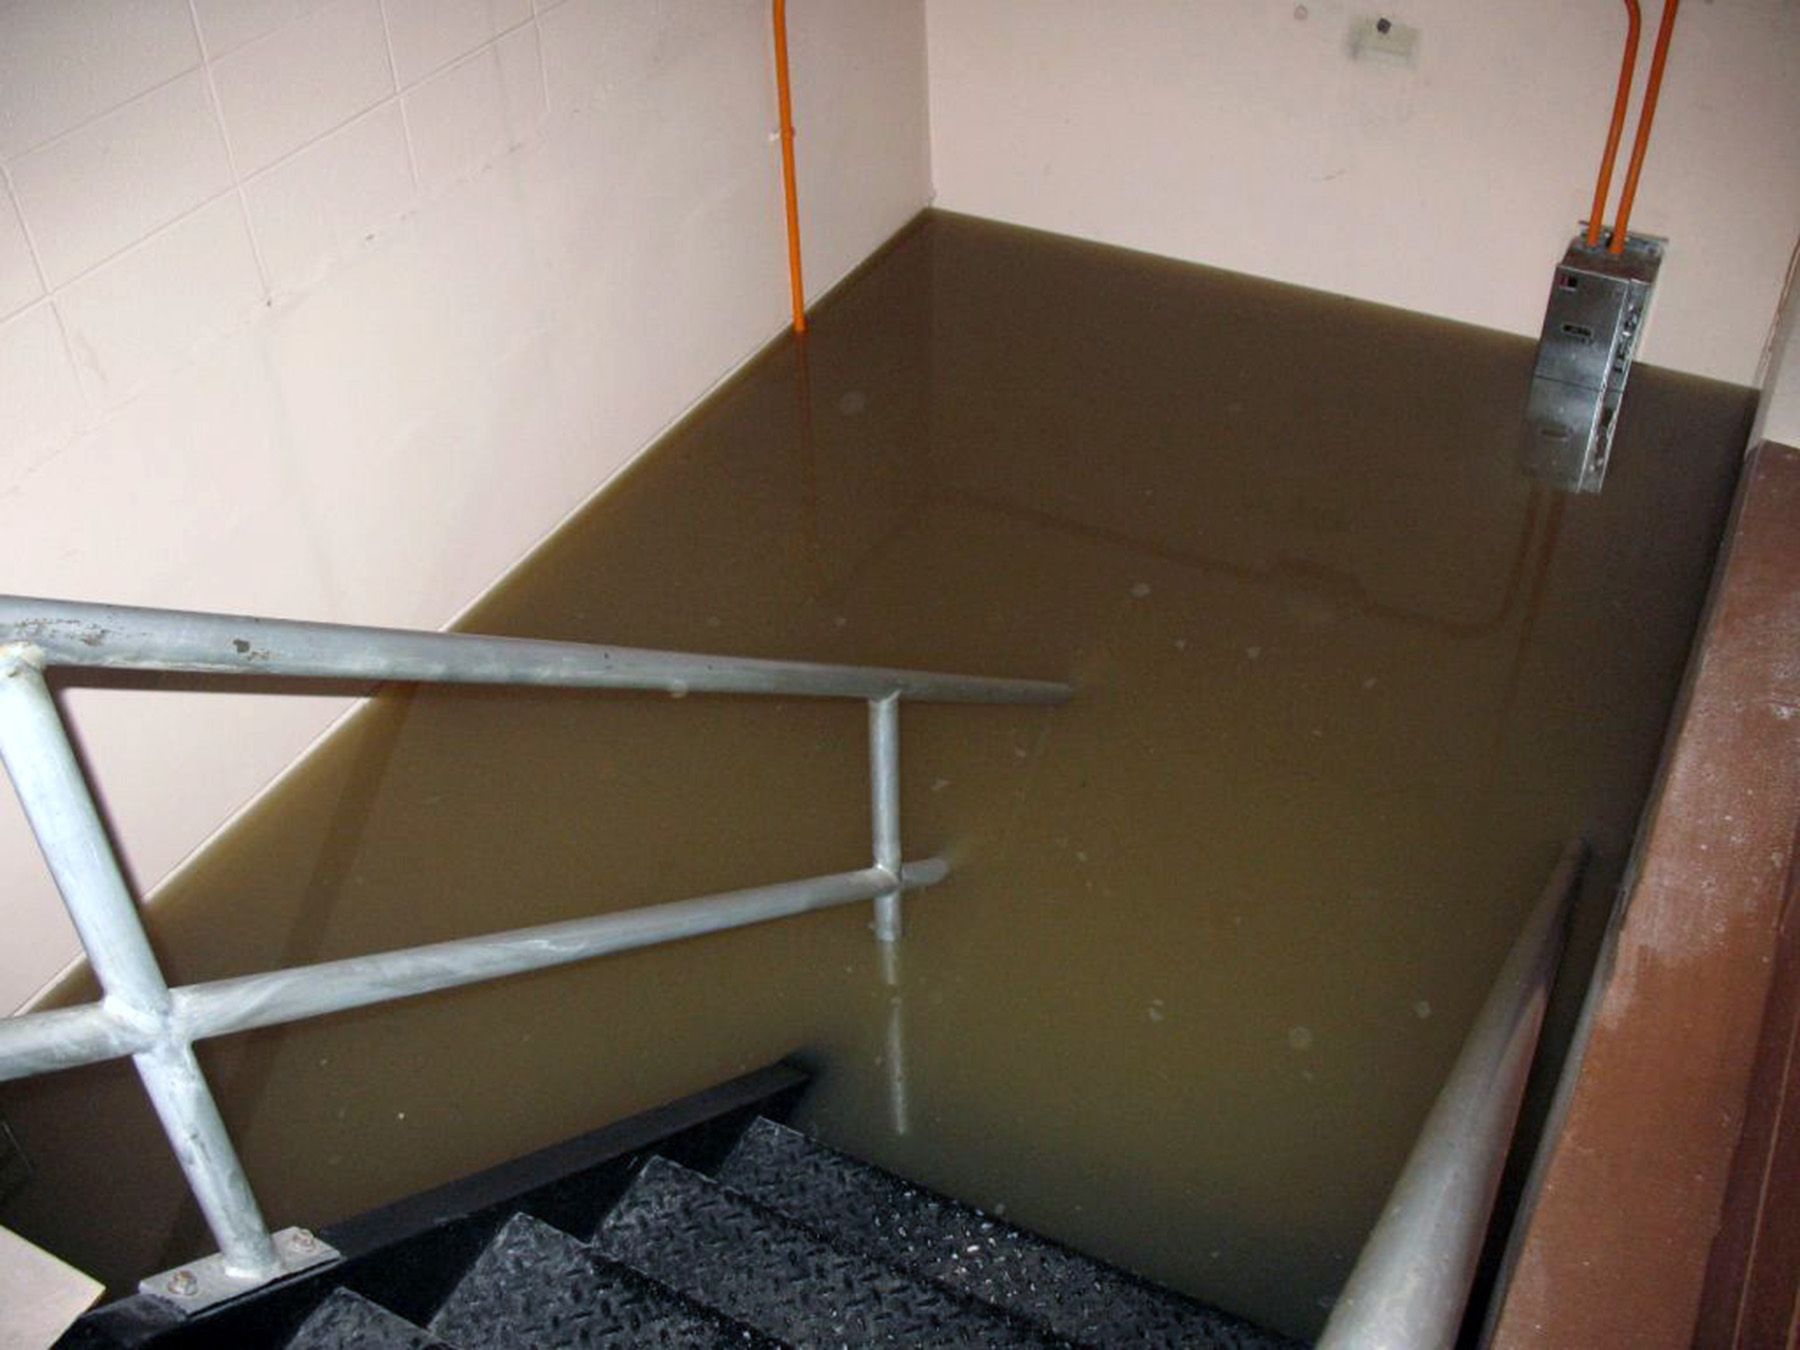 Flooded stairwell at K.R. Harrington Water Treatment Plant.